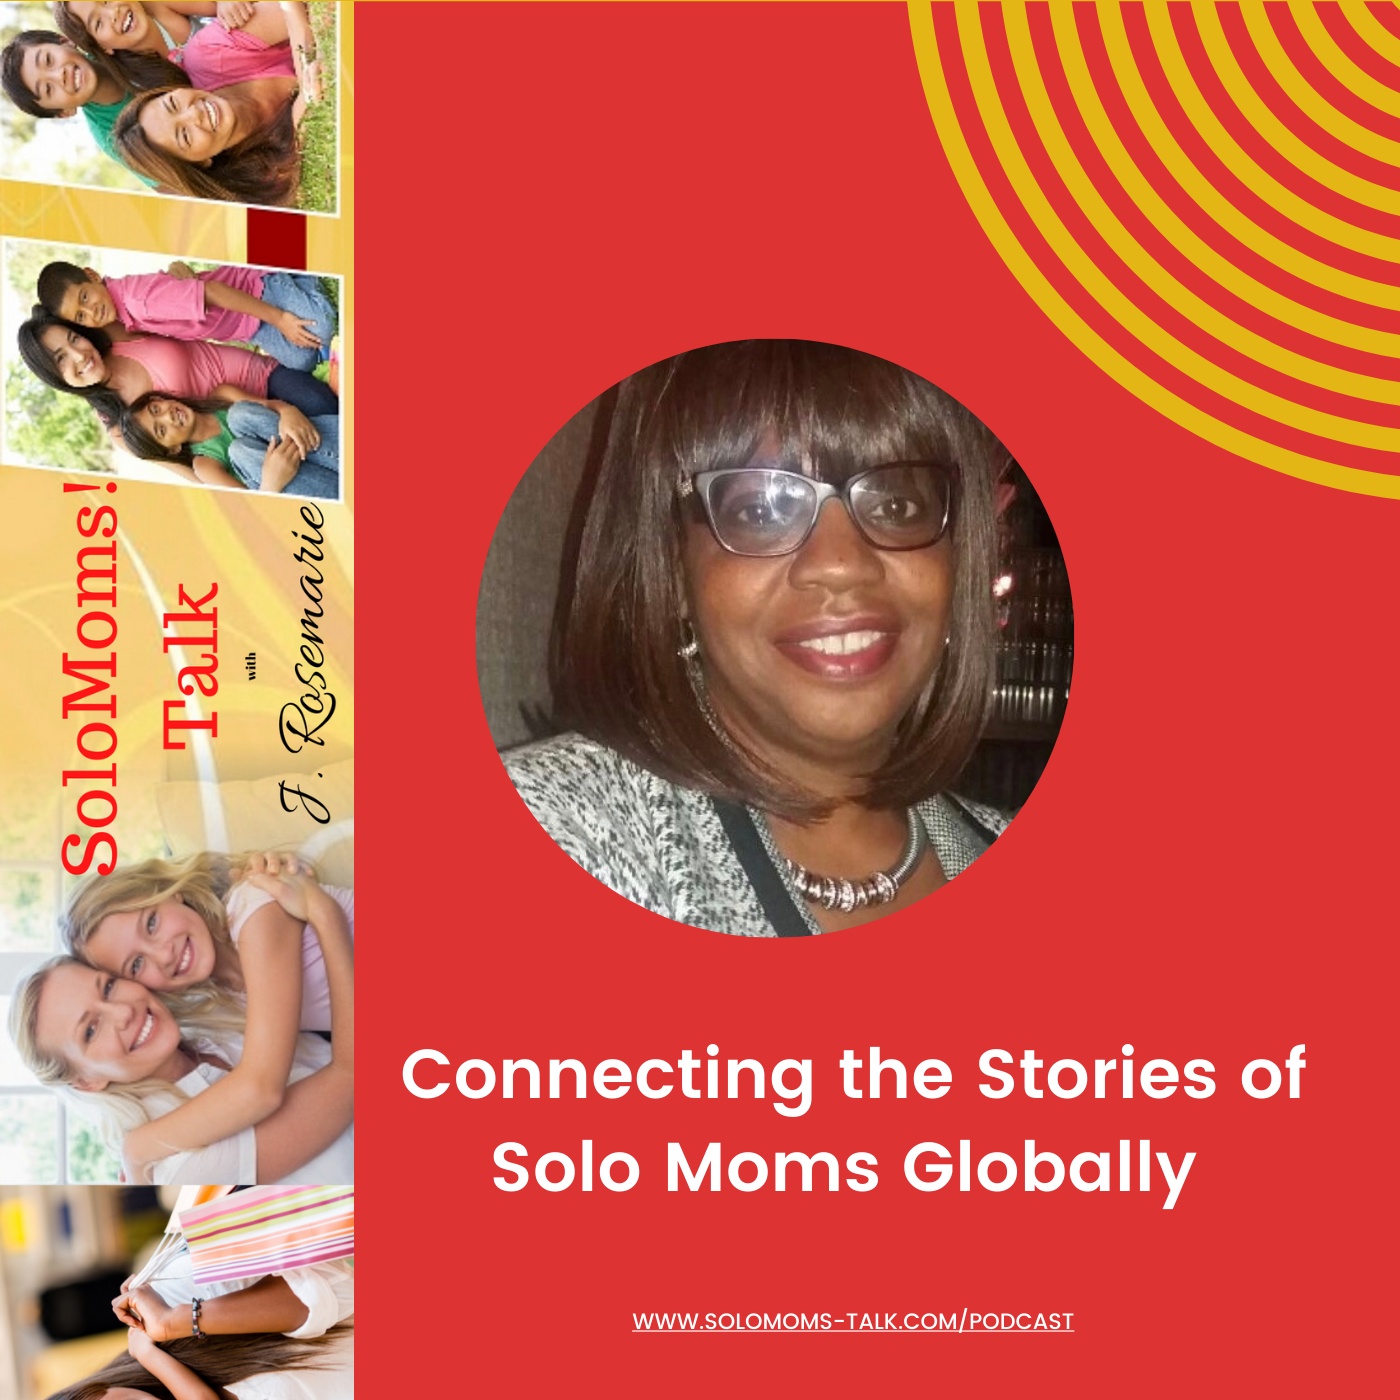 SoloMoms! Talk Intro - connecting the stories of solo moms globally